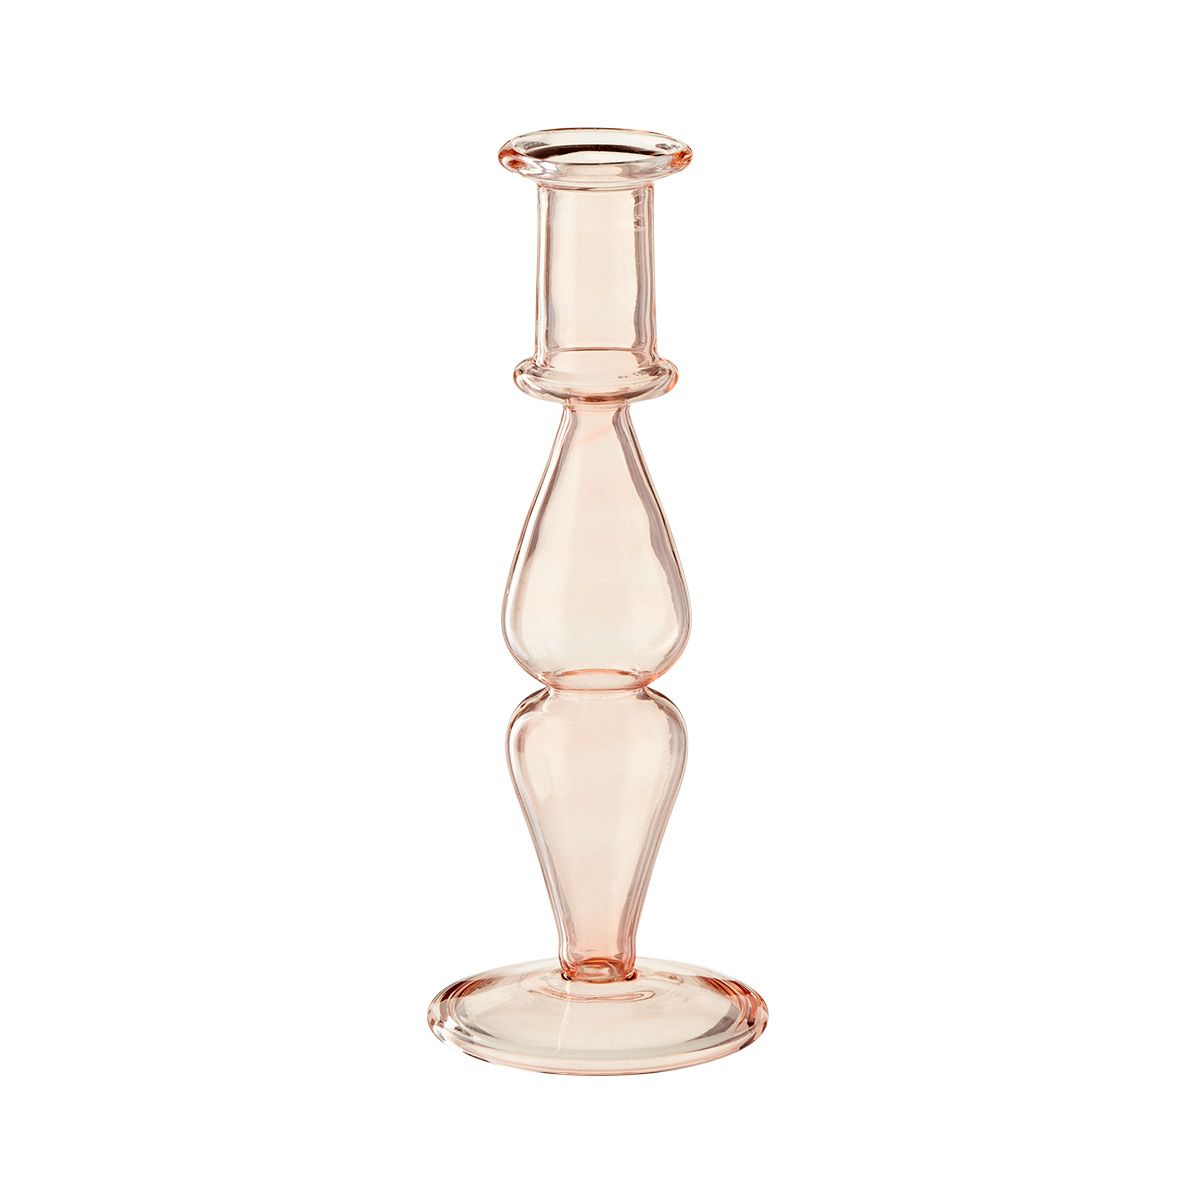 Be Home Borosilicate Glass Candlestick Rose PinkBy Be Home0.0No Reviews$36.00/eaOr 4 payments of ... | The Container Store